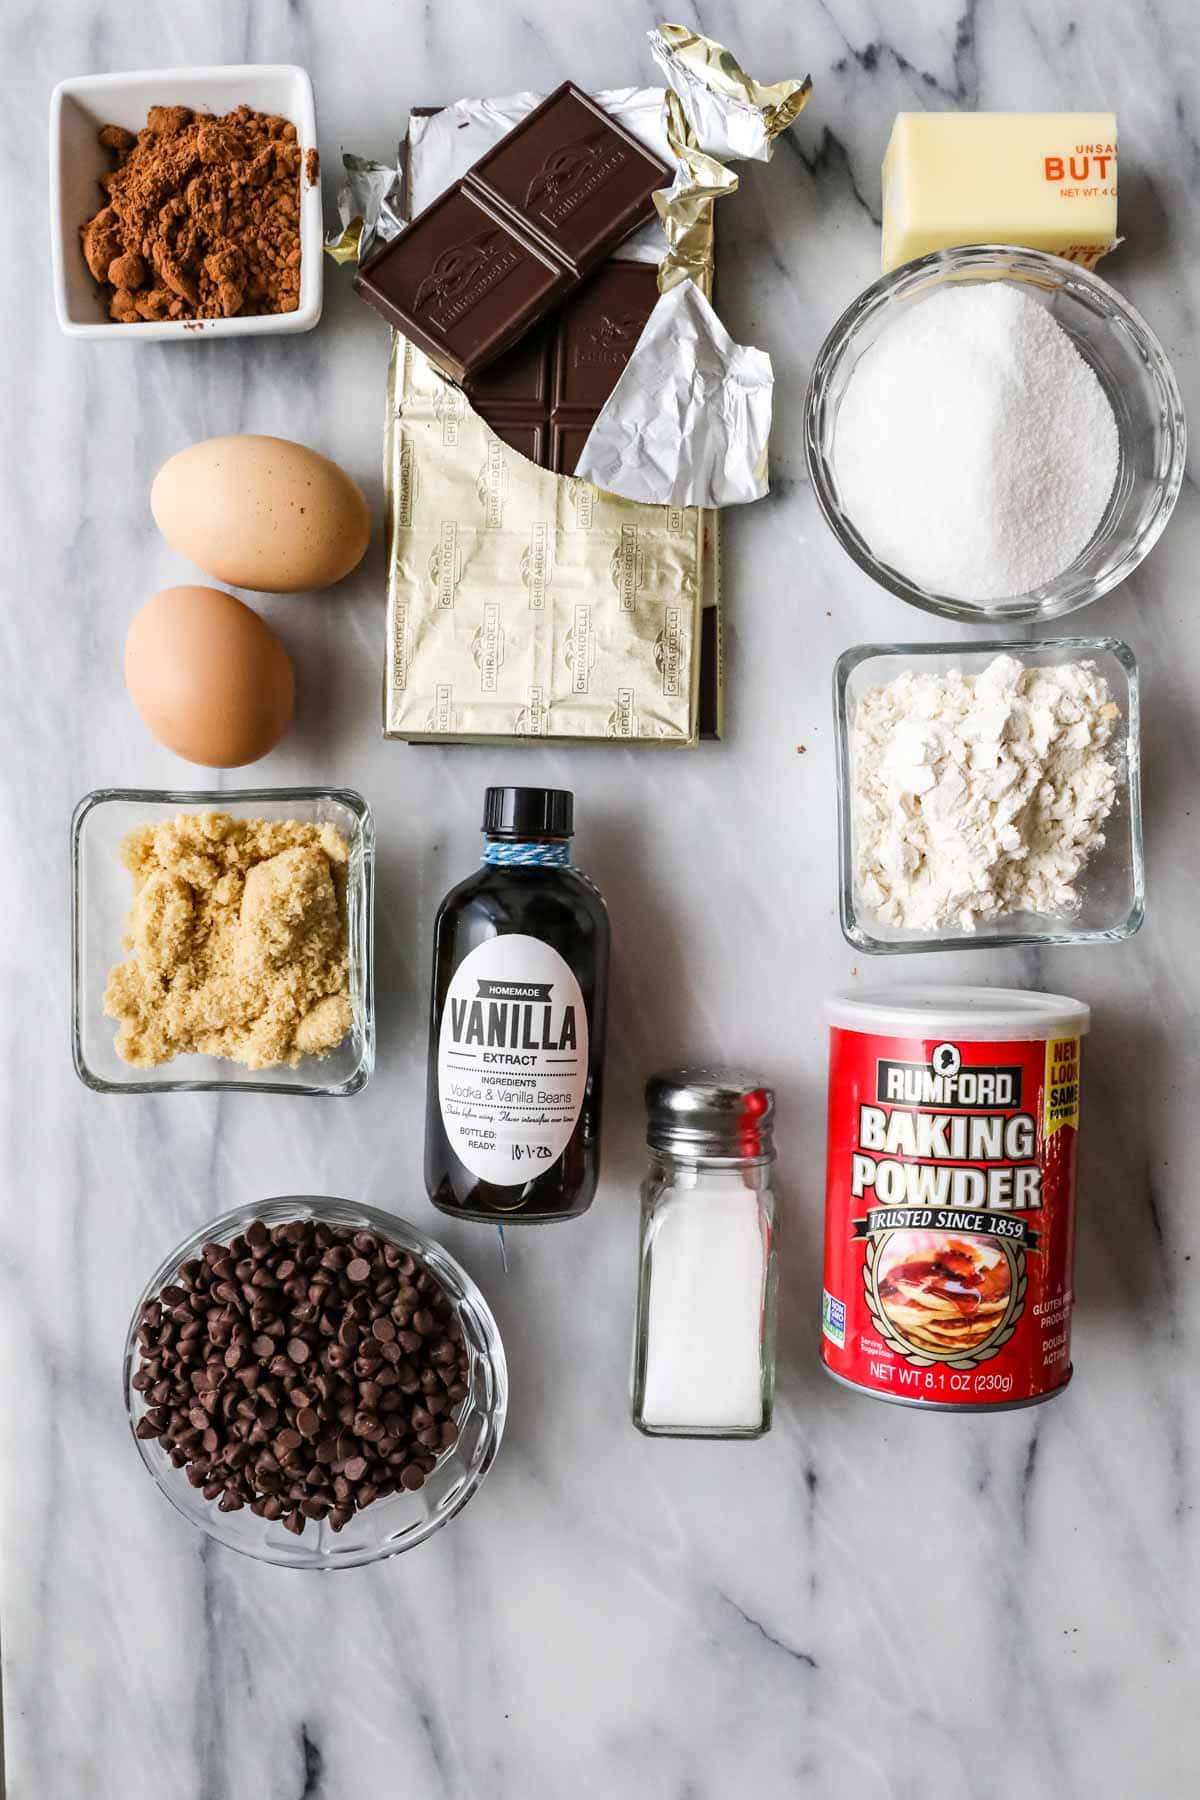 Overhead view of ingredients including cocoa powder, chocolate, brown sugar, eggs, and more.